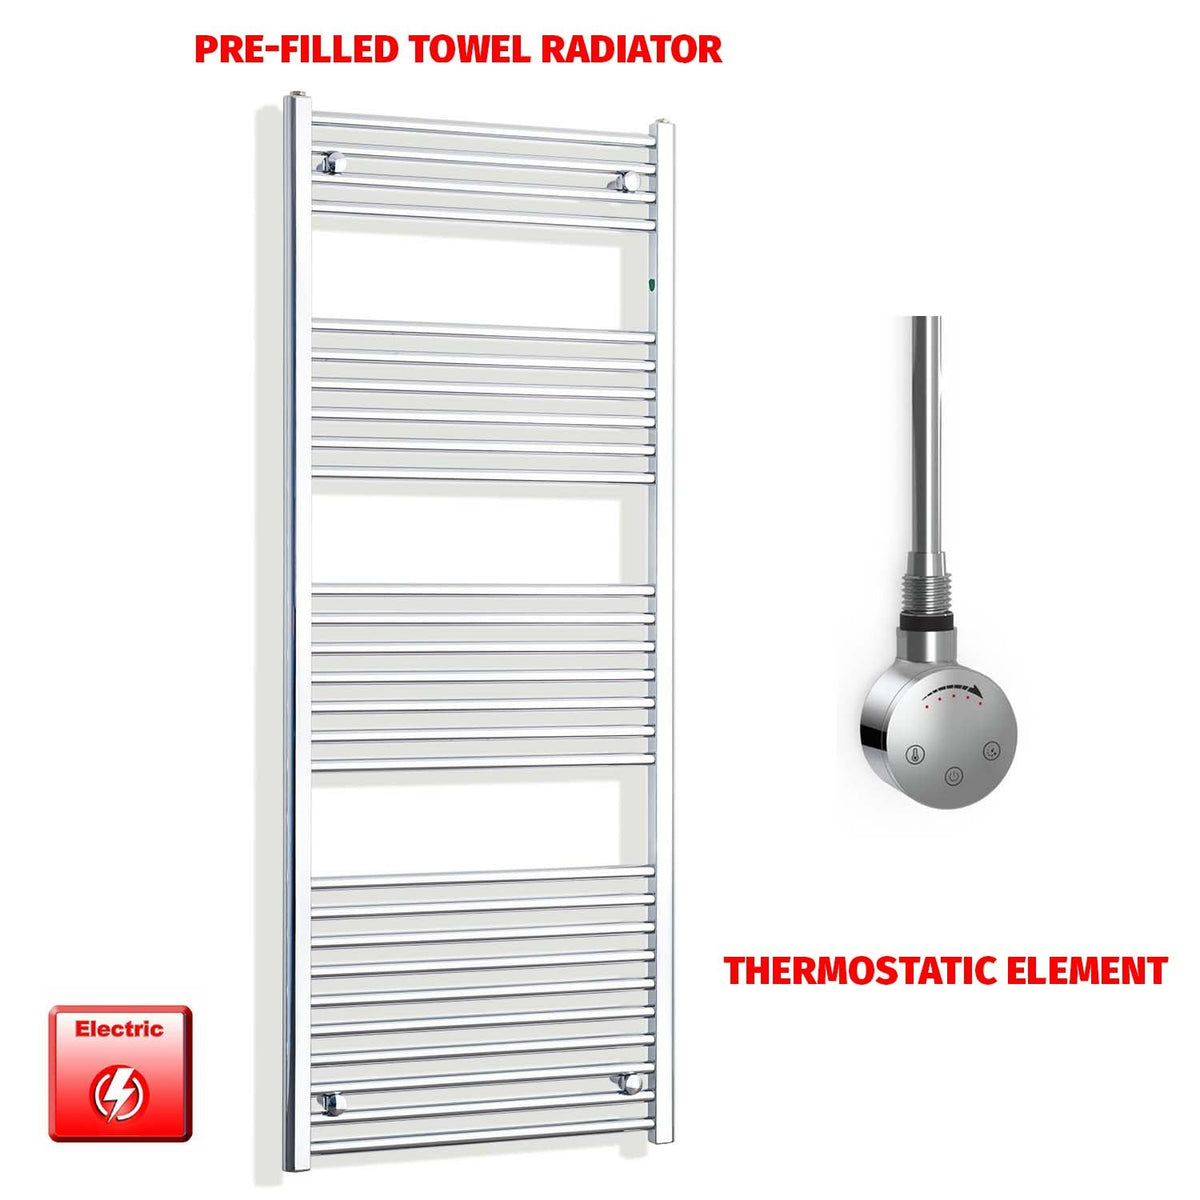 1600mm High 500mm Wide Pre-Filled Electric Heated Towel Radiator Straight or Curved Chrome SMR Thermostatic element no timer